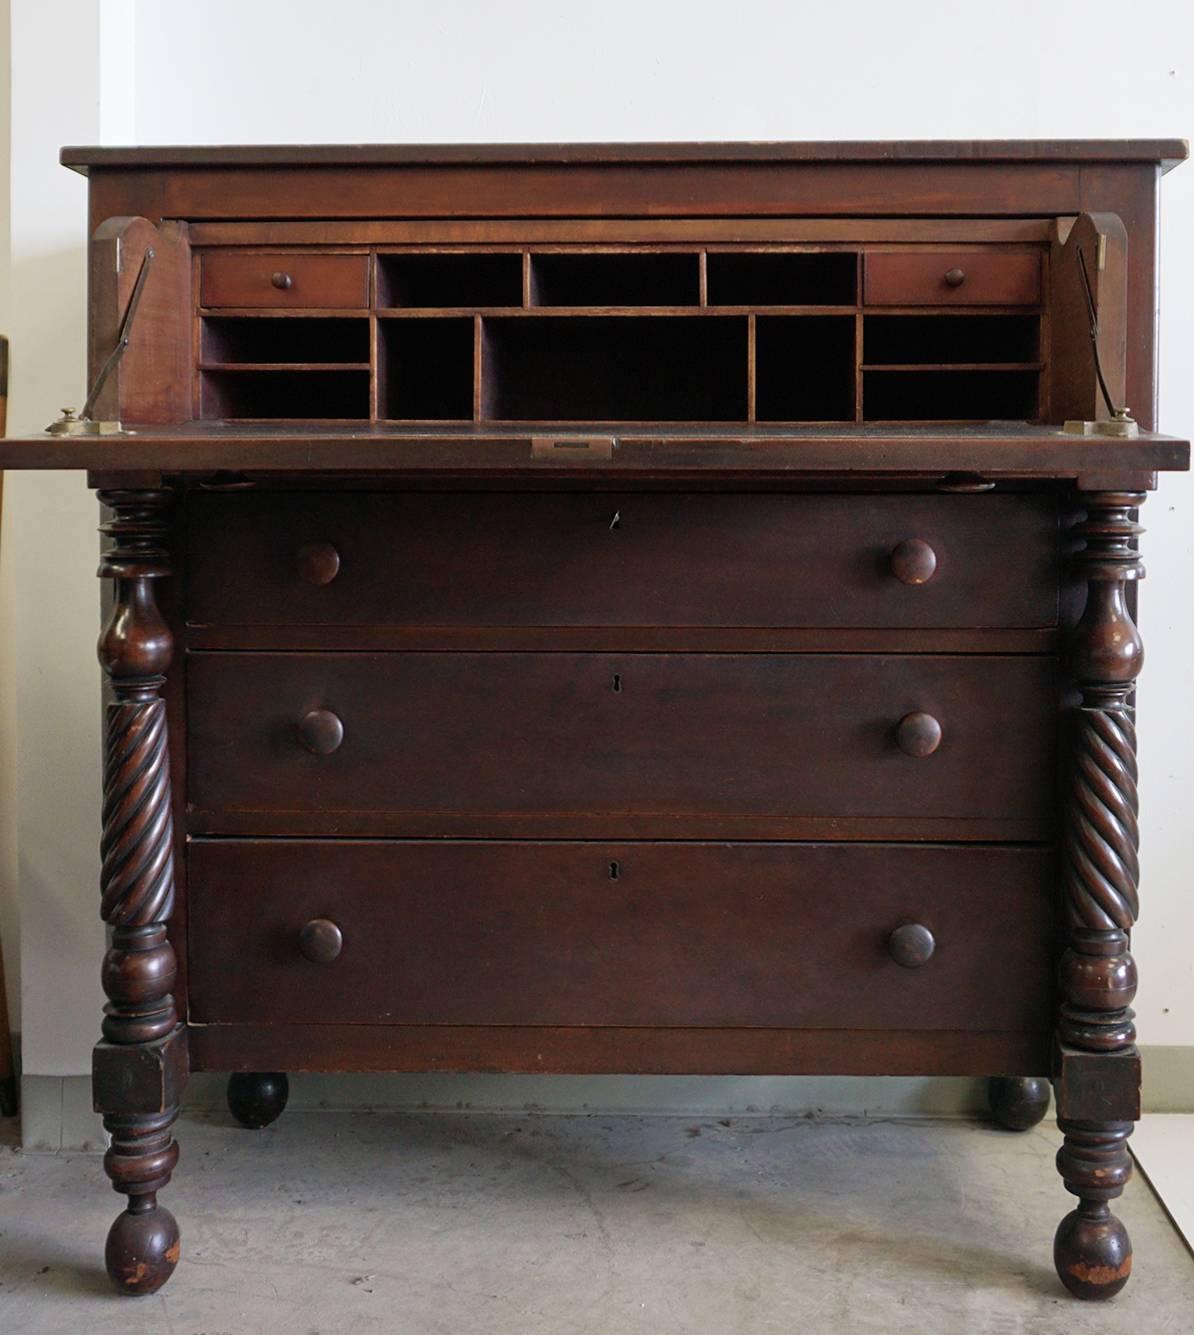 Cherry drop front butler chest with desk drawer.